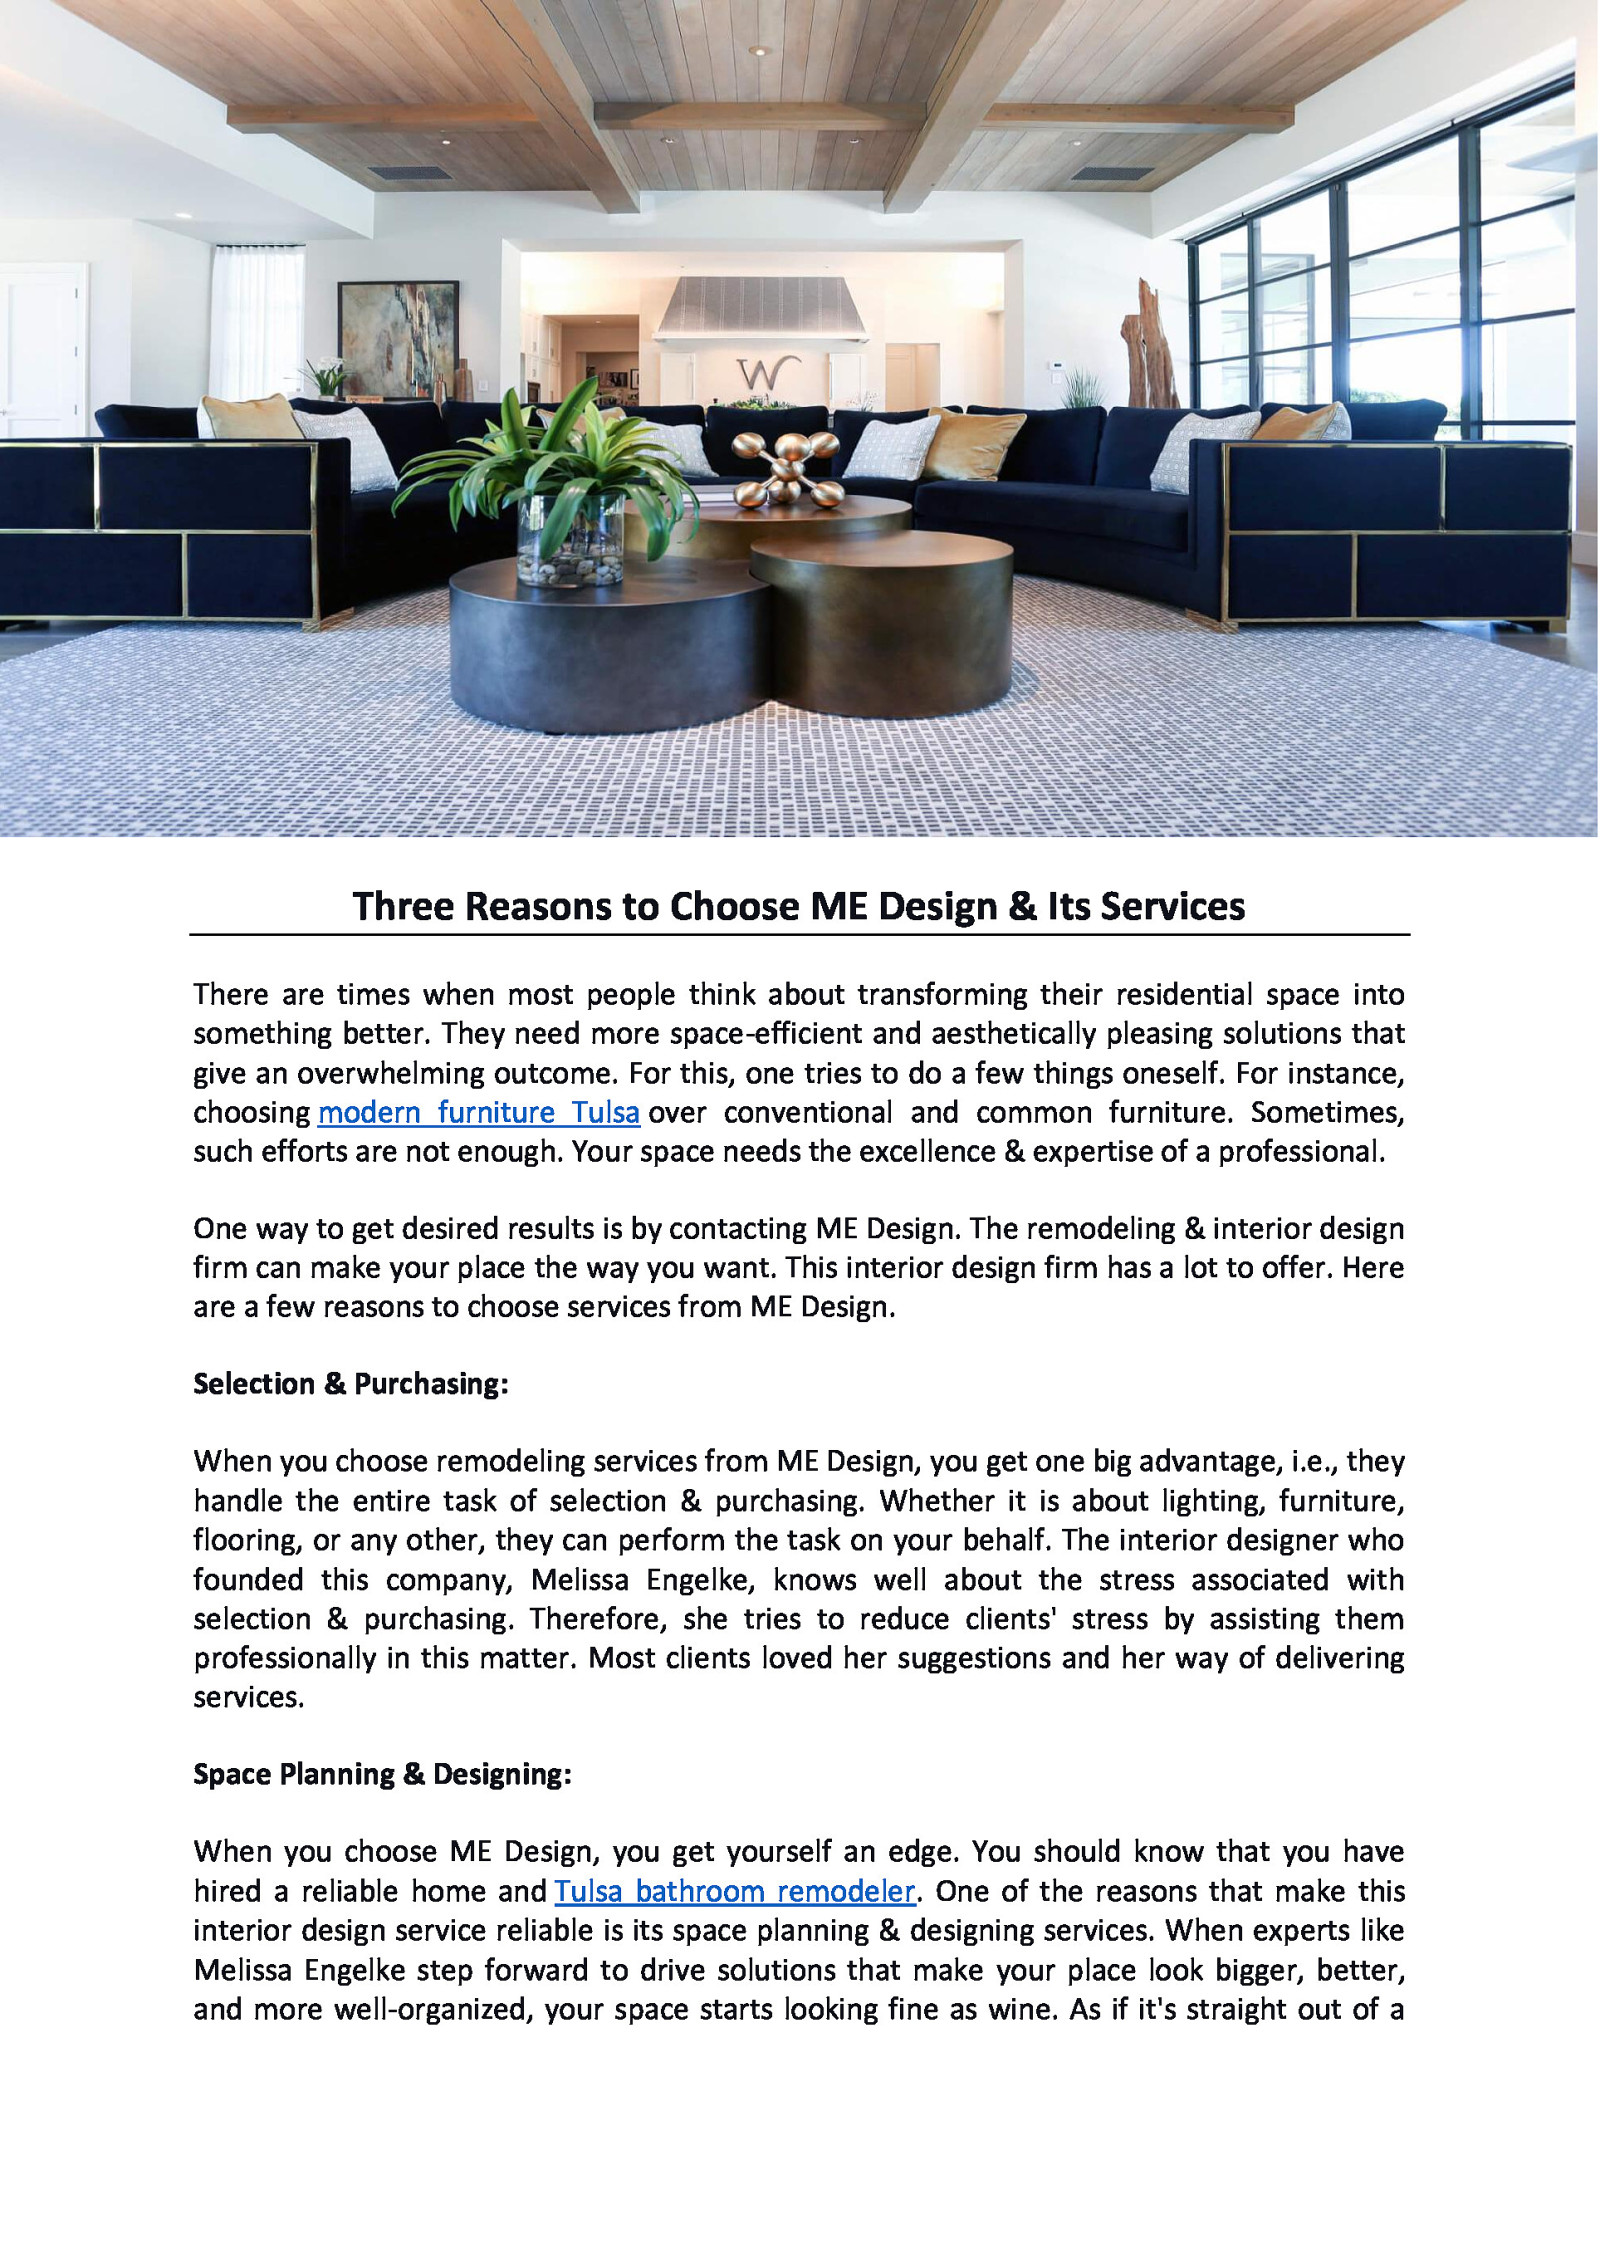 Three Reasons to Choose ME Design & Its Services